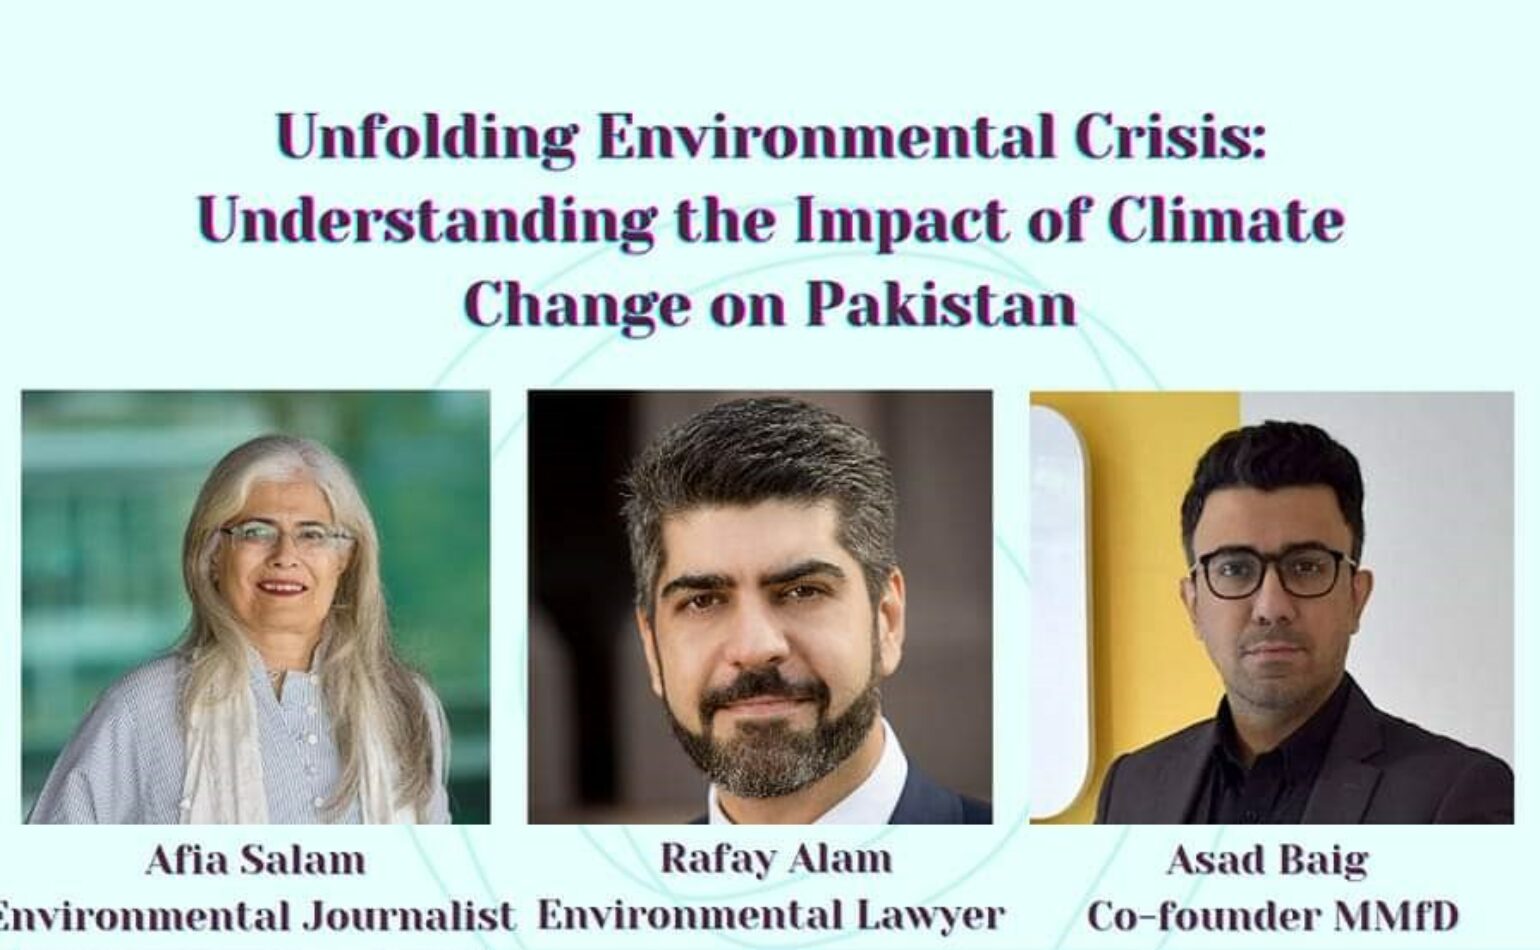 Pakistan’s Environment Crisis: Media has a Important Role to Play in Communicating Climate Change 